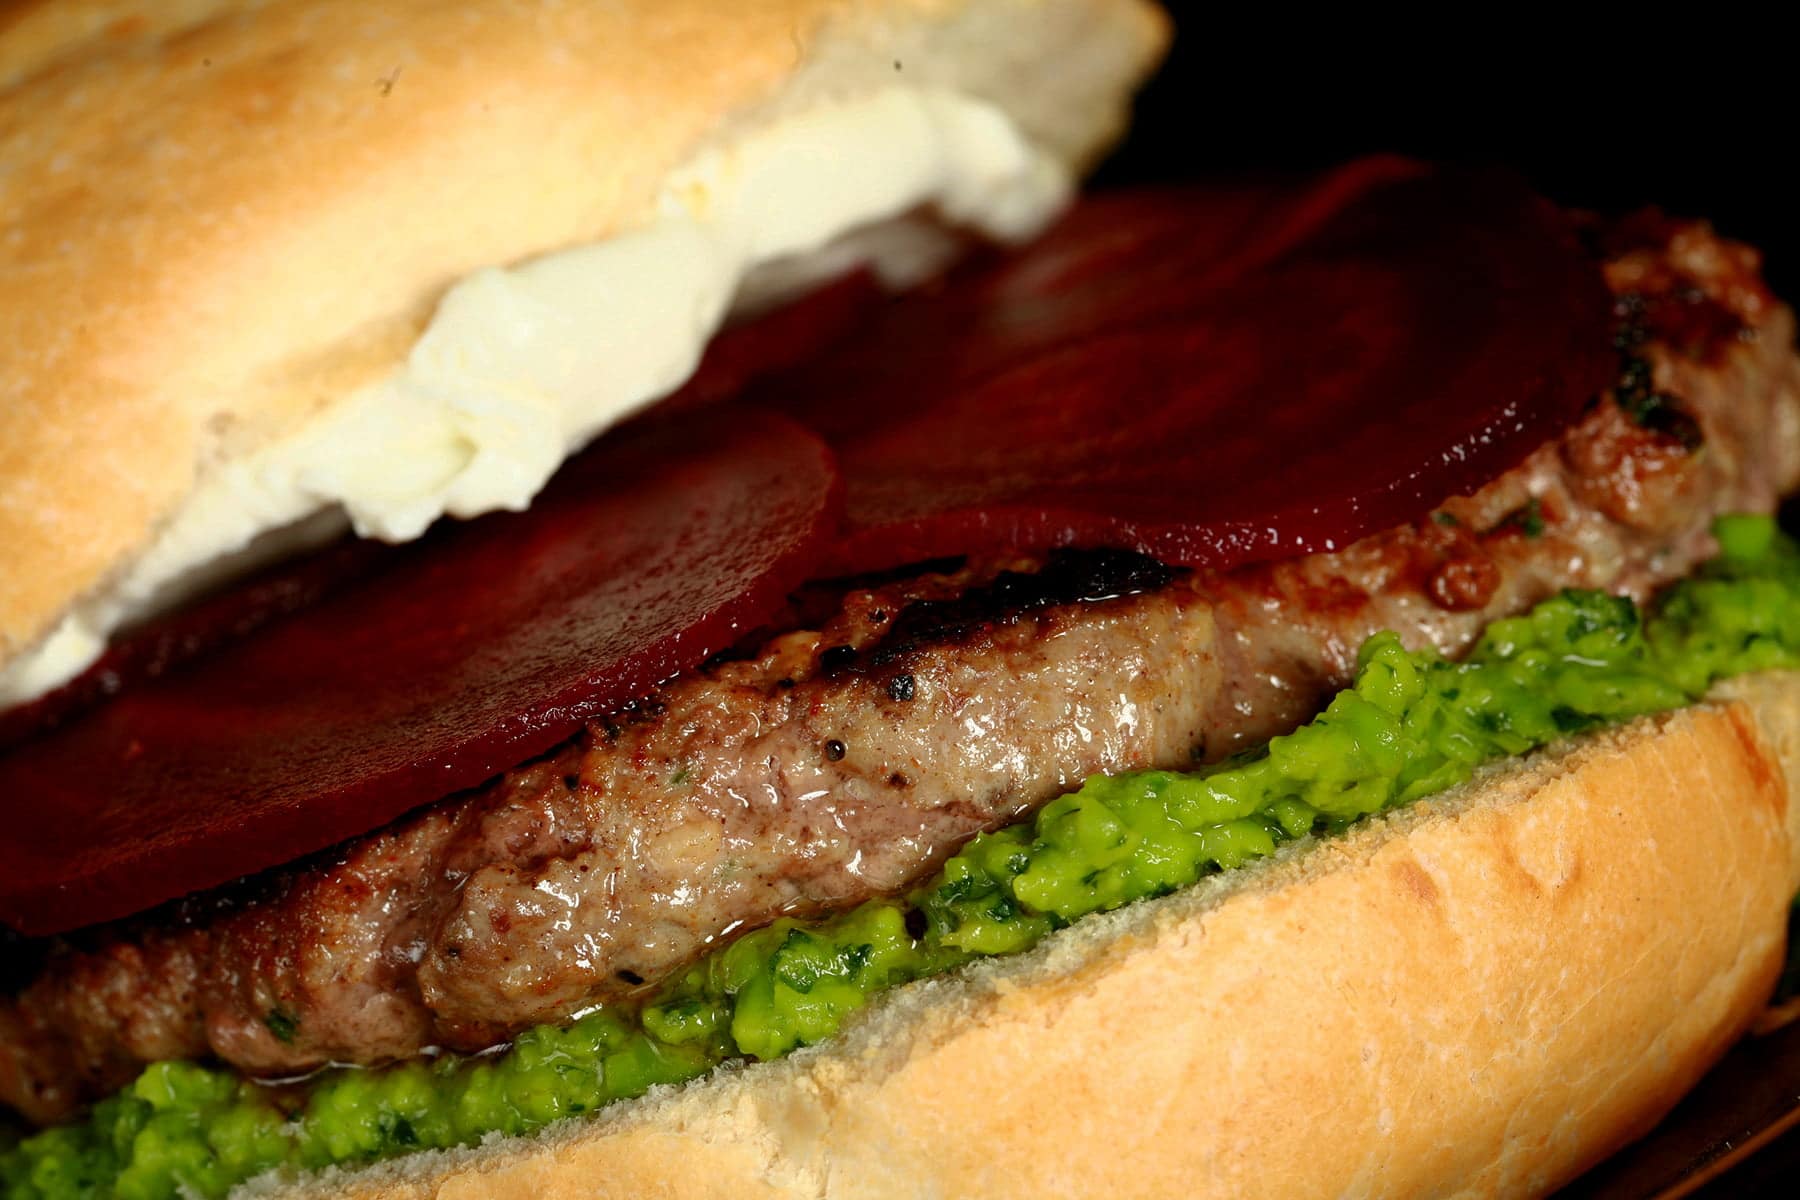 Close up view of a lamb burger with a green spread, a goat cheese spread, and beet slices on it.